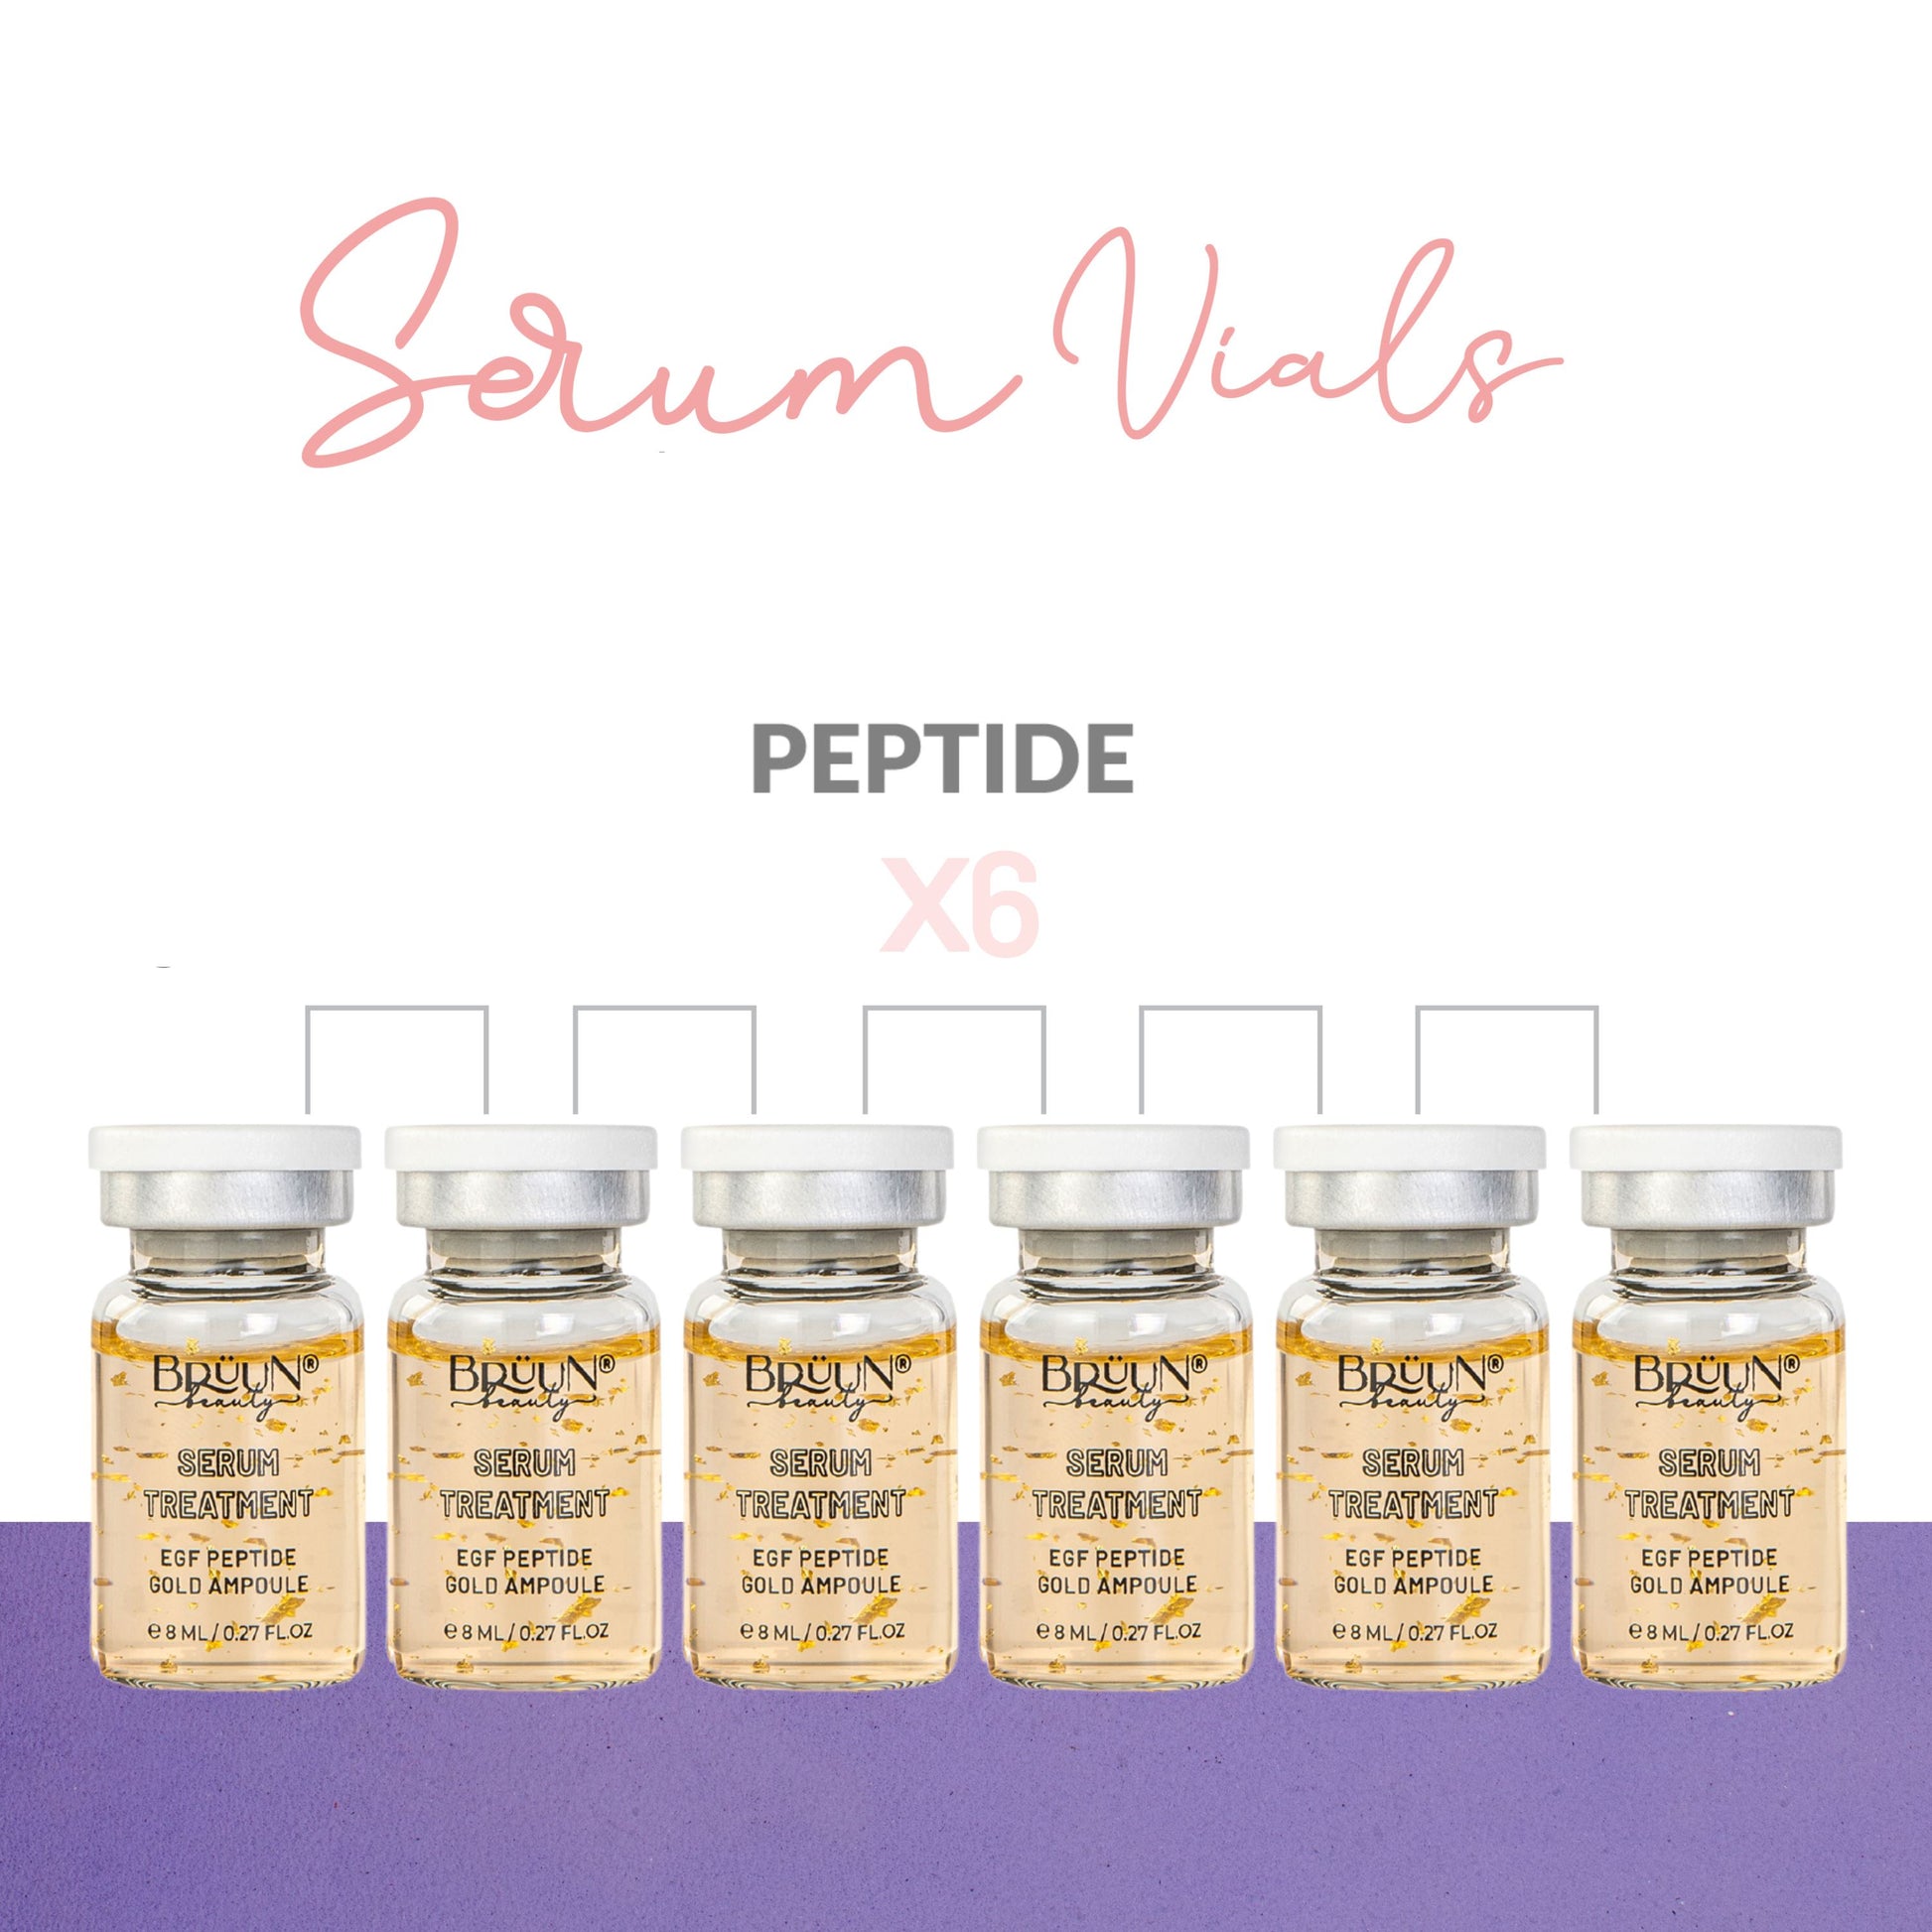 BRÜUN BB Glow Serum Ampoule – A (Pack of 6) EGF Peptide Ampoule for Skin strength and Elasticity – A Skin Care Kit for Spa, School, Estheticians use with Derma Pen for Fresh Look and Natural Beauty Results Bruun Beauty 